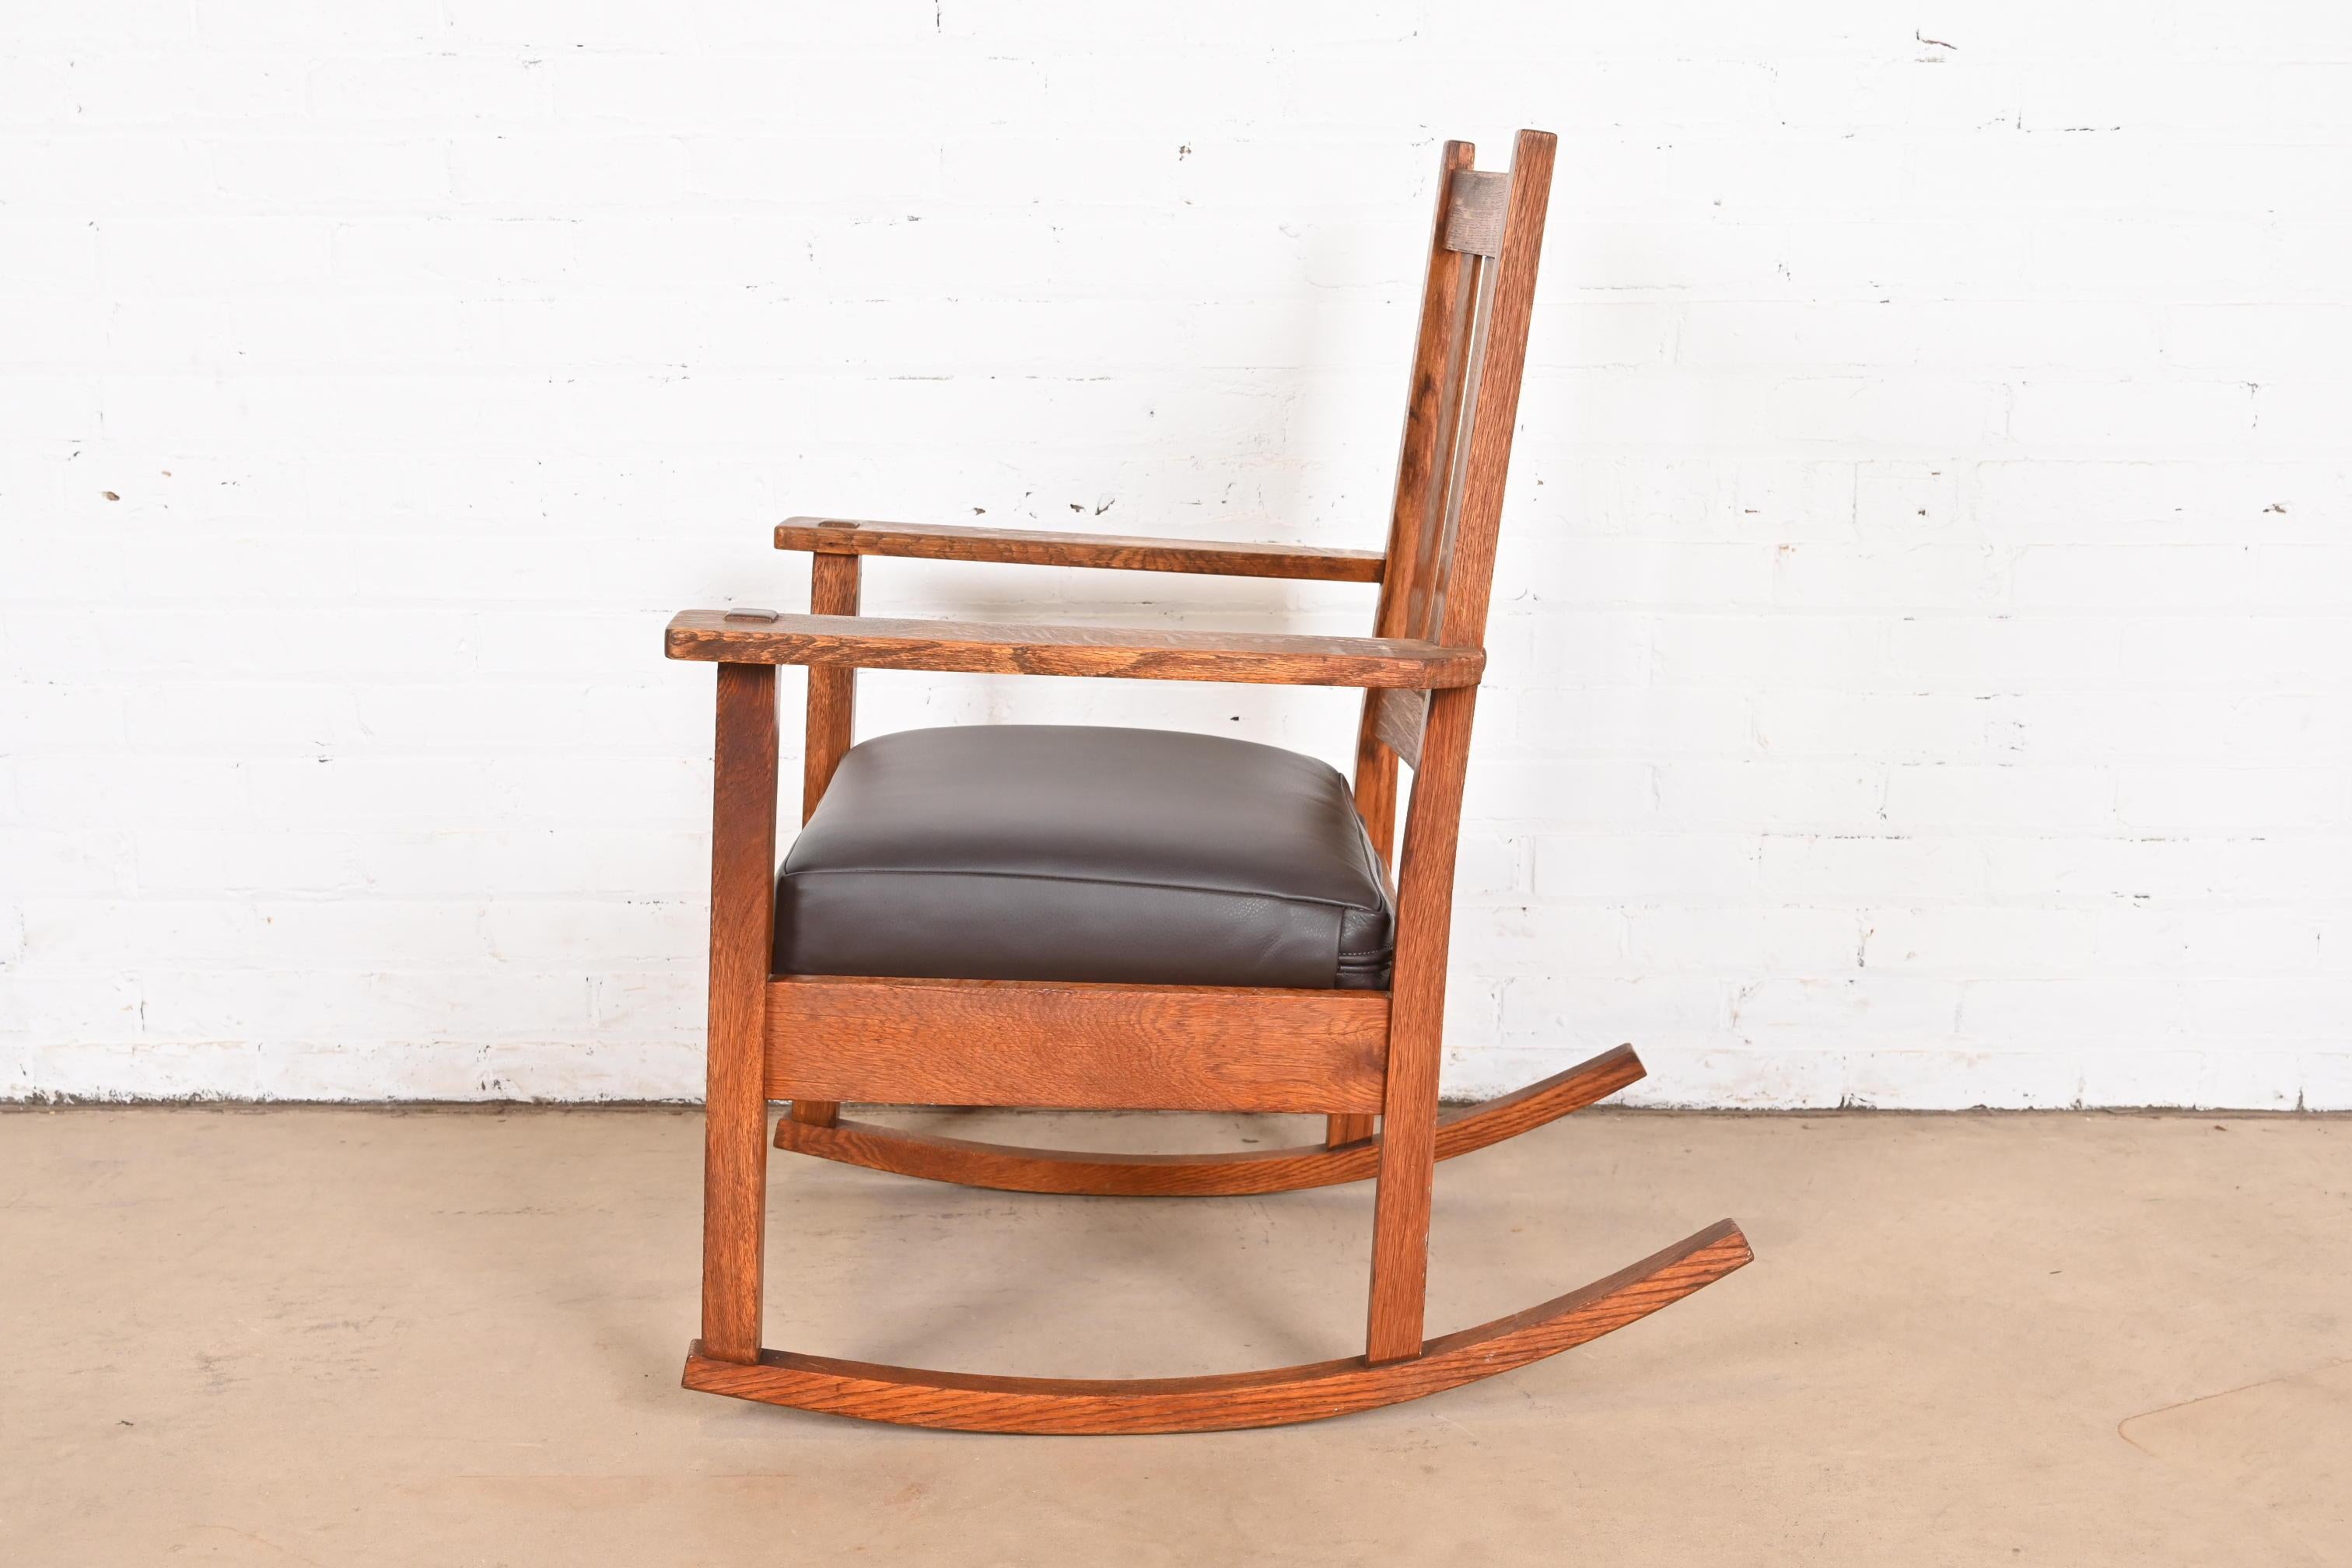 Stickley Brothers Antique Mission Oak Arts & Crafts Rocking Chair, Circa 1900 For Sale 4